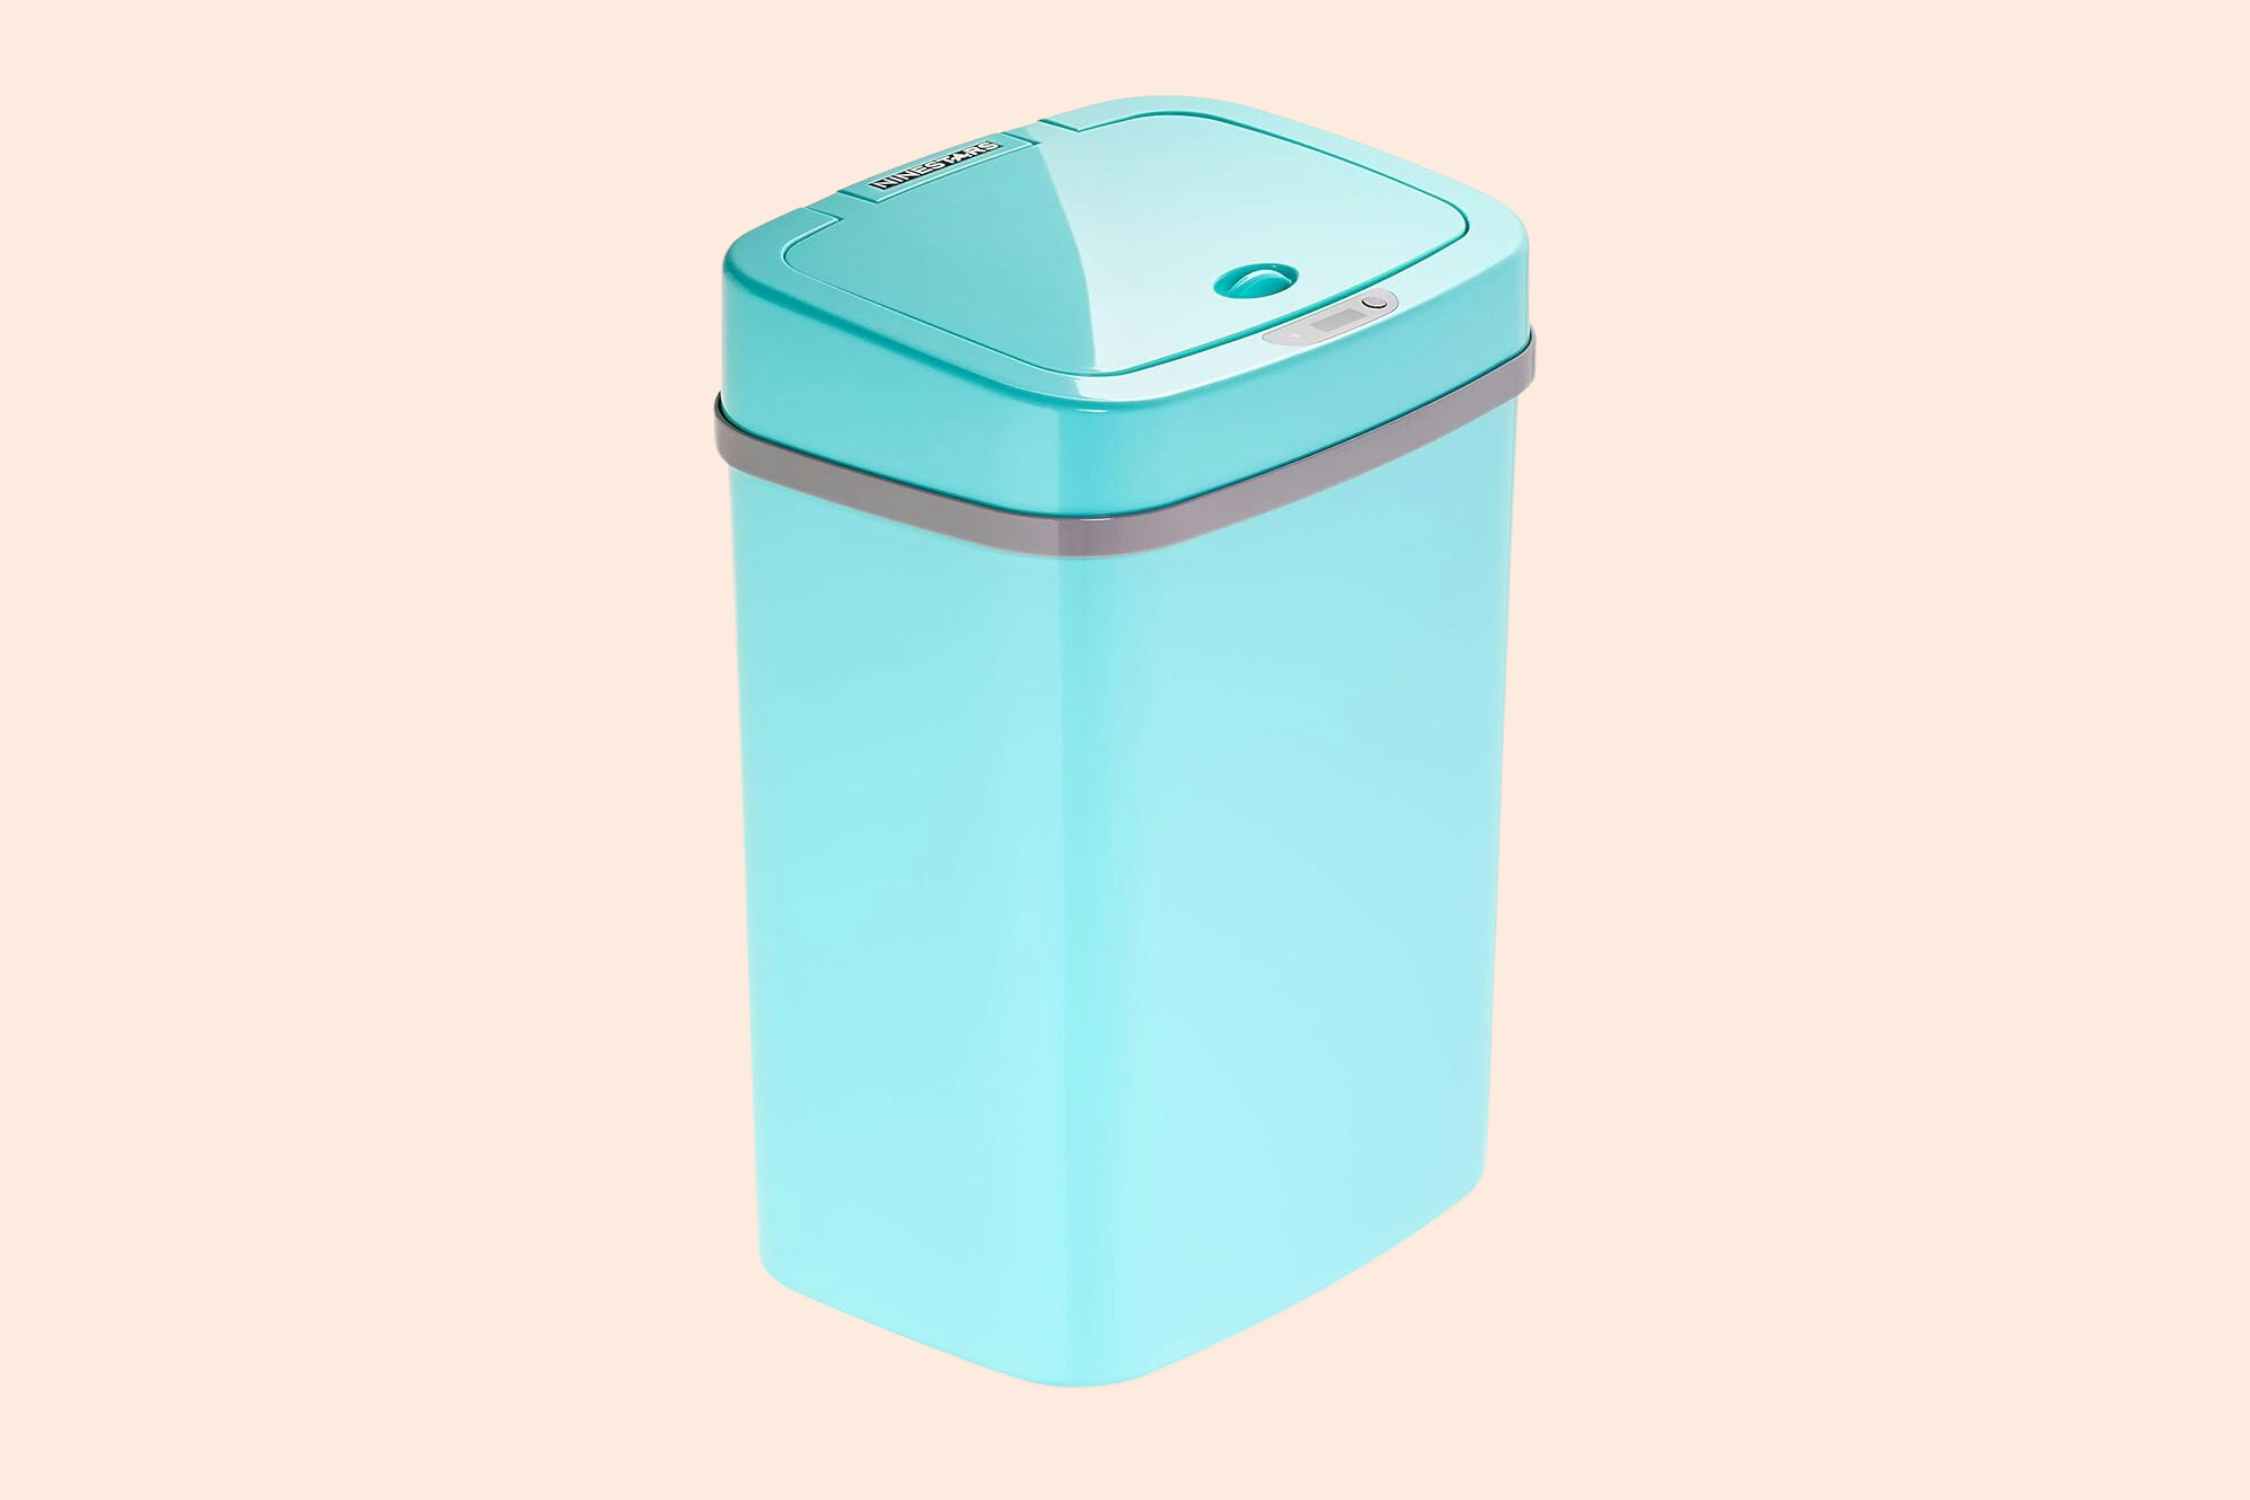 Automatic Motion-Sensor Trash Can, Just $17.98 on Amazon